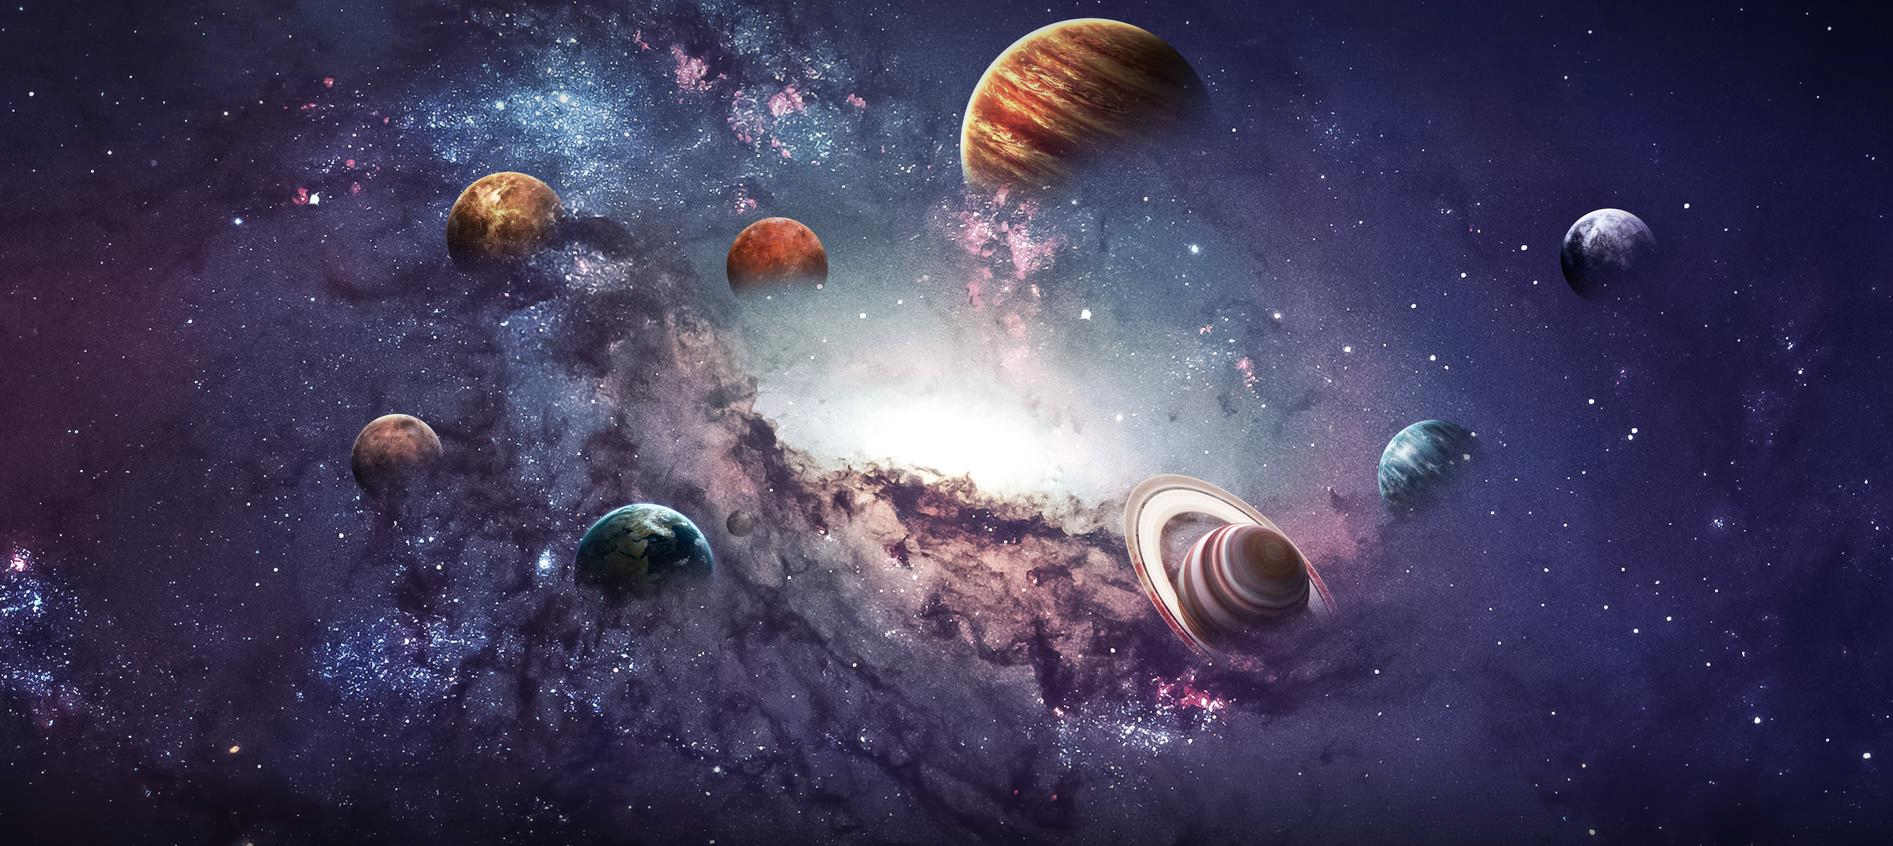 Space Planet 1893x846